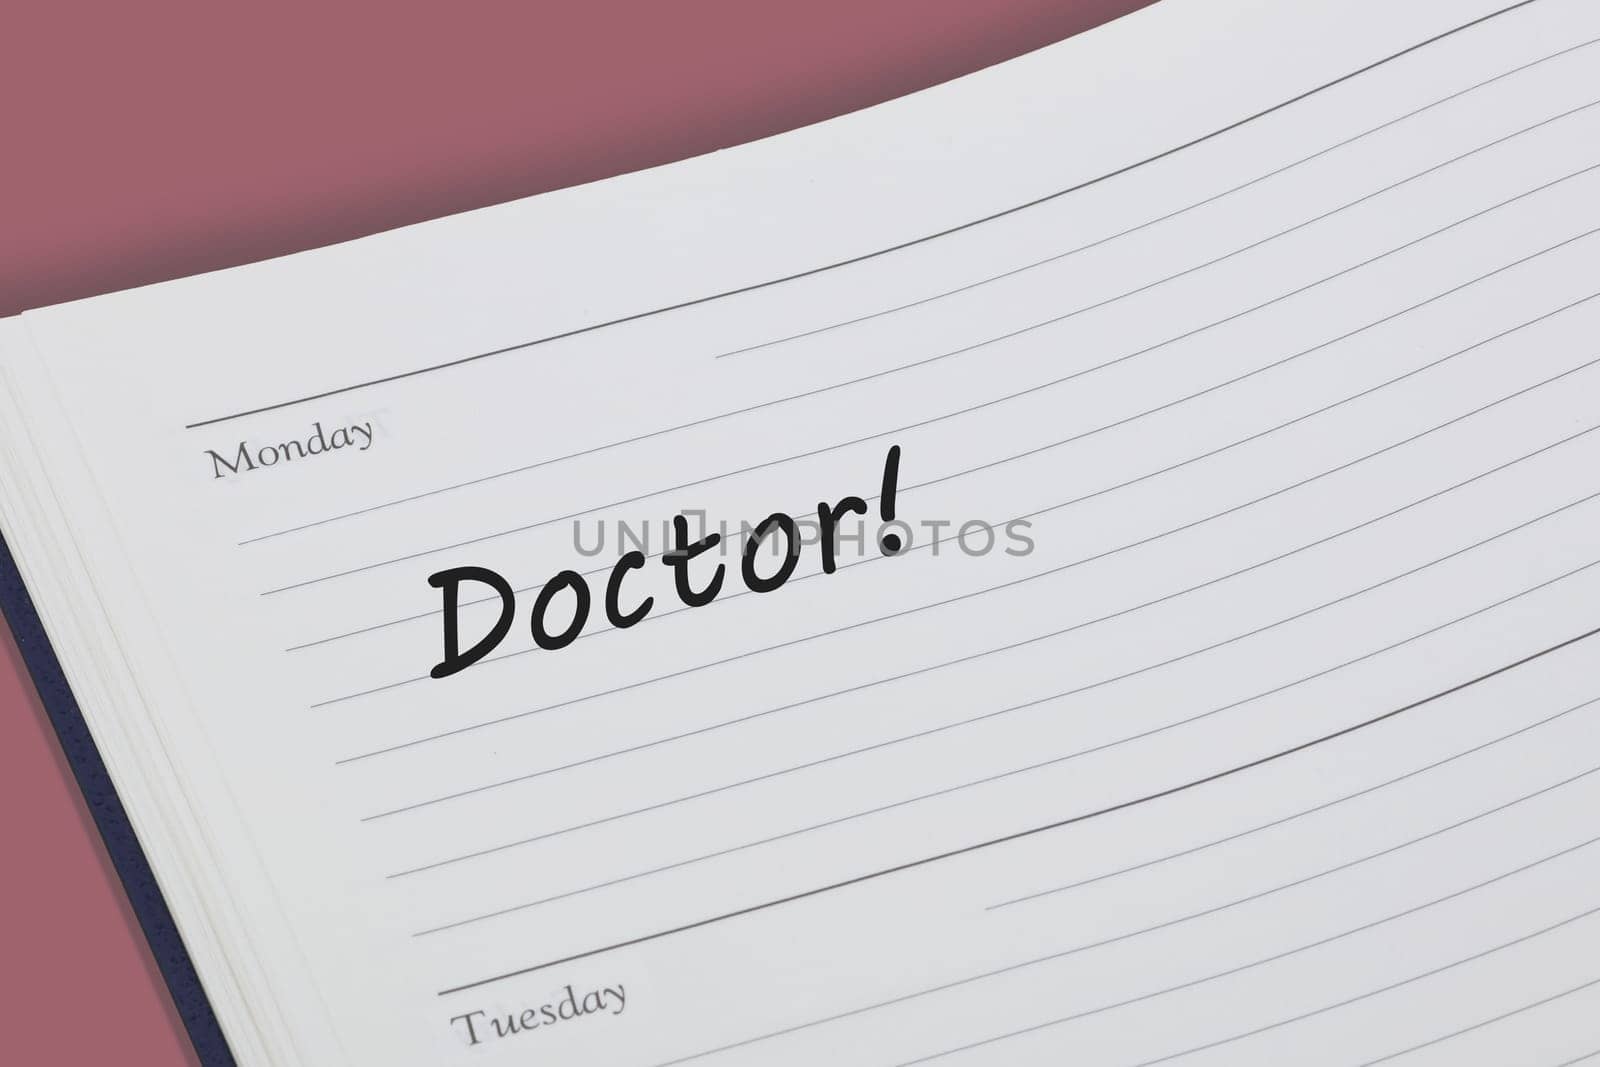 A Doctor reminder note in a diary page